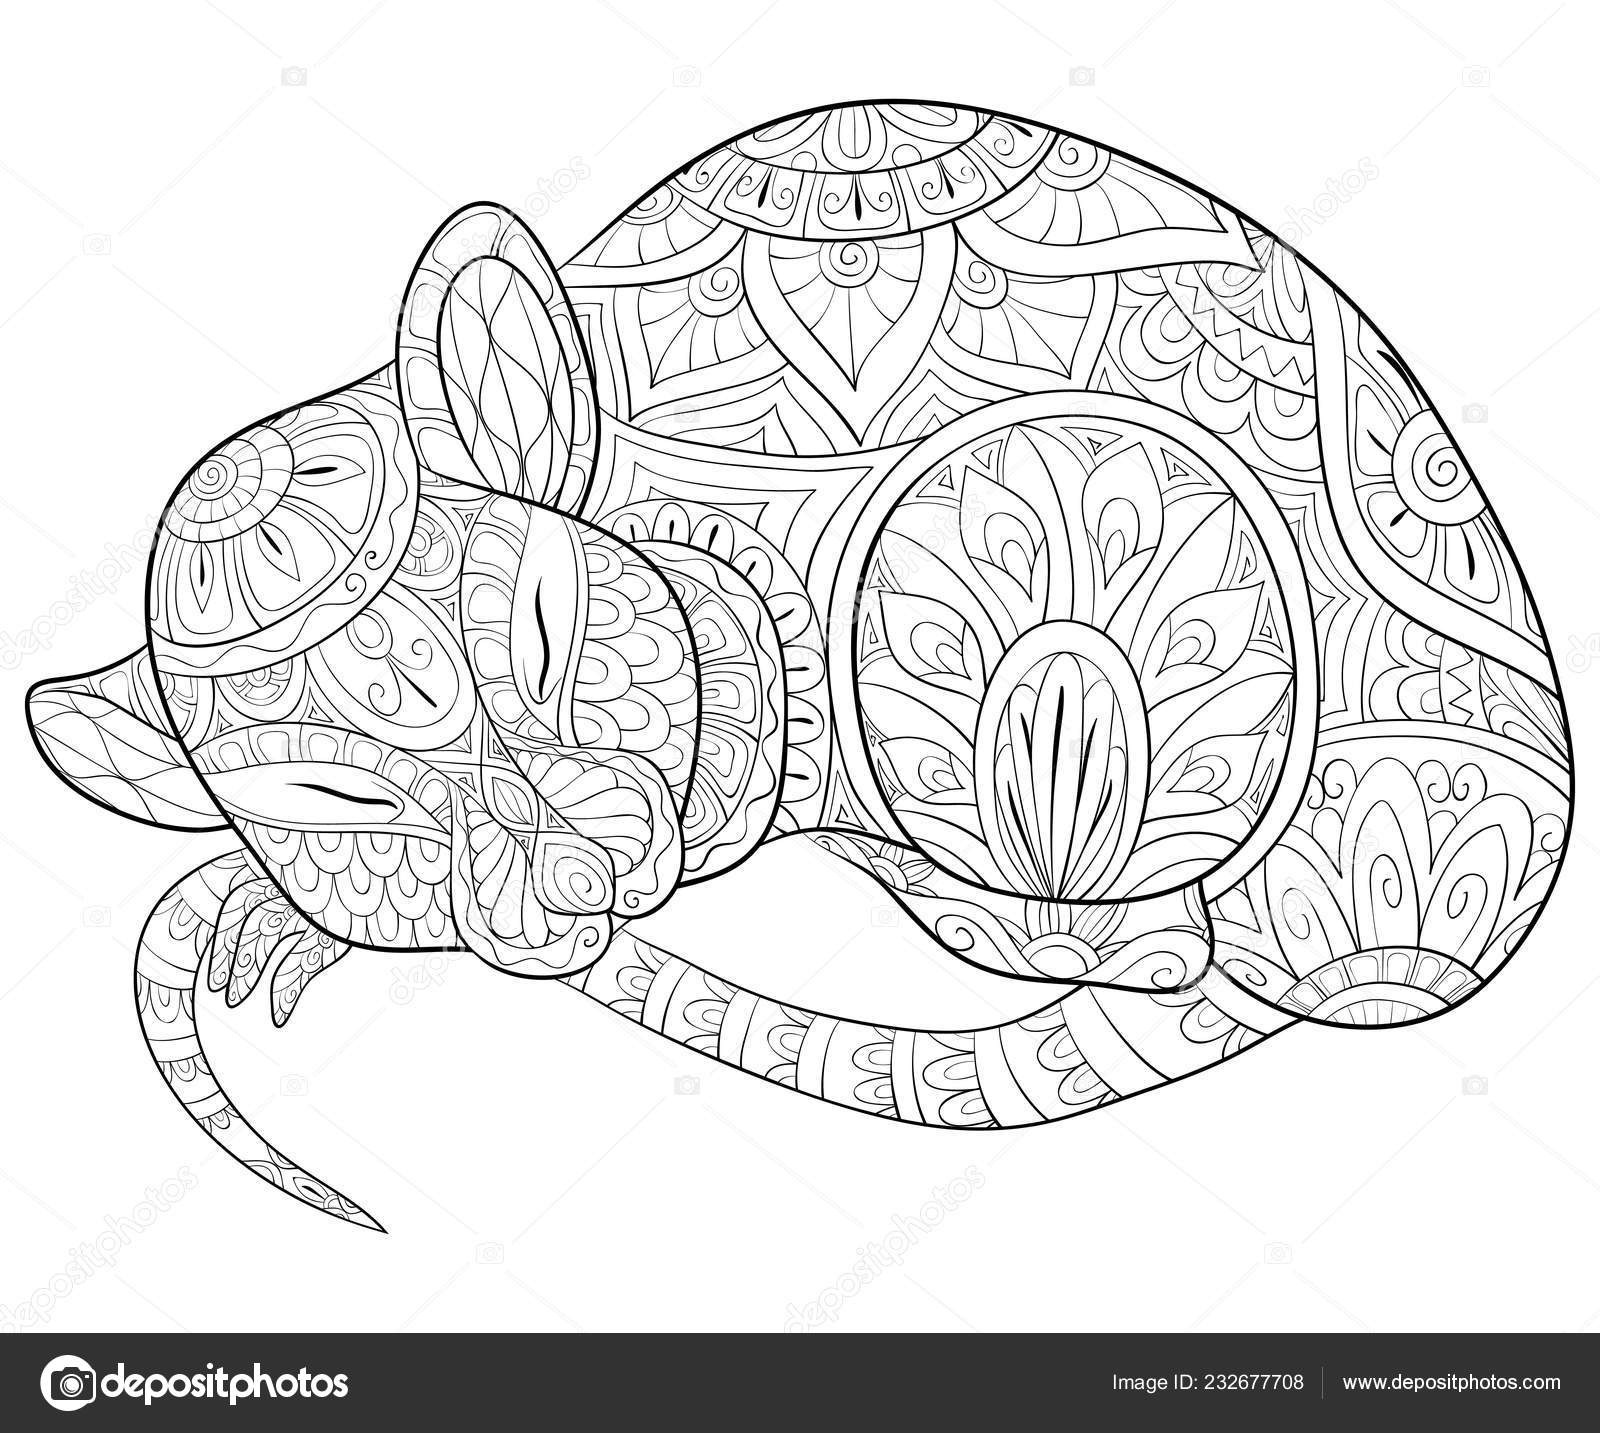 Cute Sleeping Rat Ornaments Image Relaxing Activity Coloring Book ...